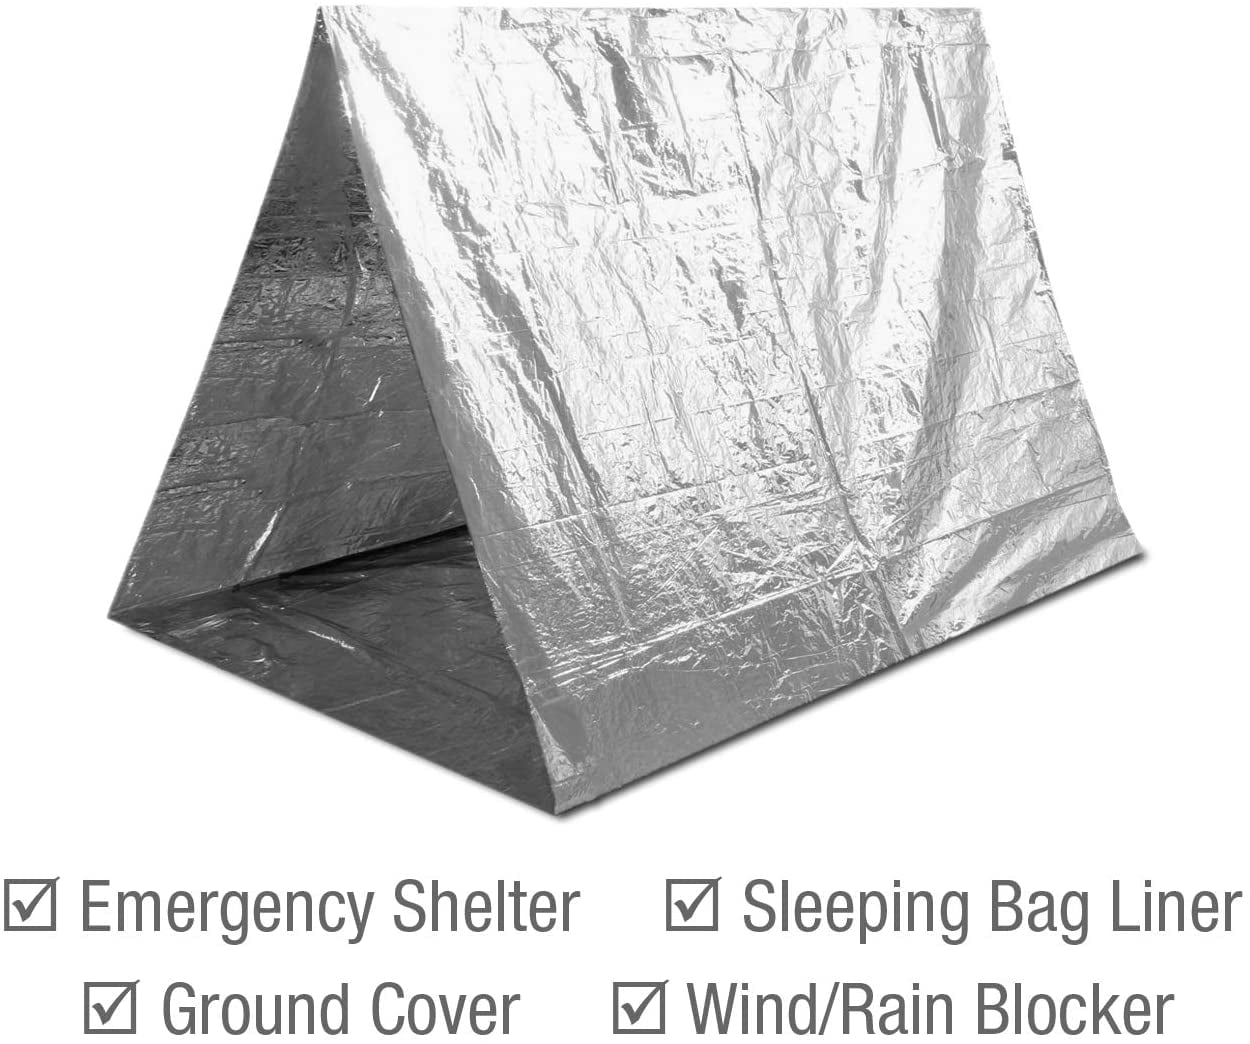 Swiss Safe Emergency Mylar Thermal Blankets Marathons or First Aid Survival Hiking Outdoors Bulk - Designed for NASA